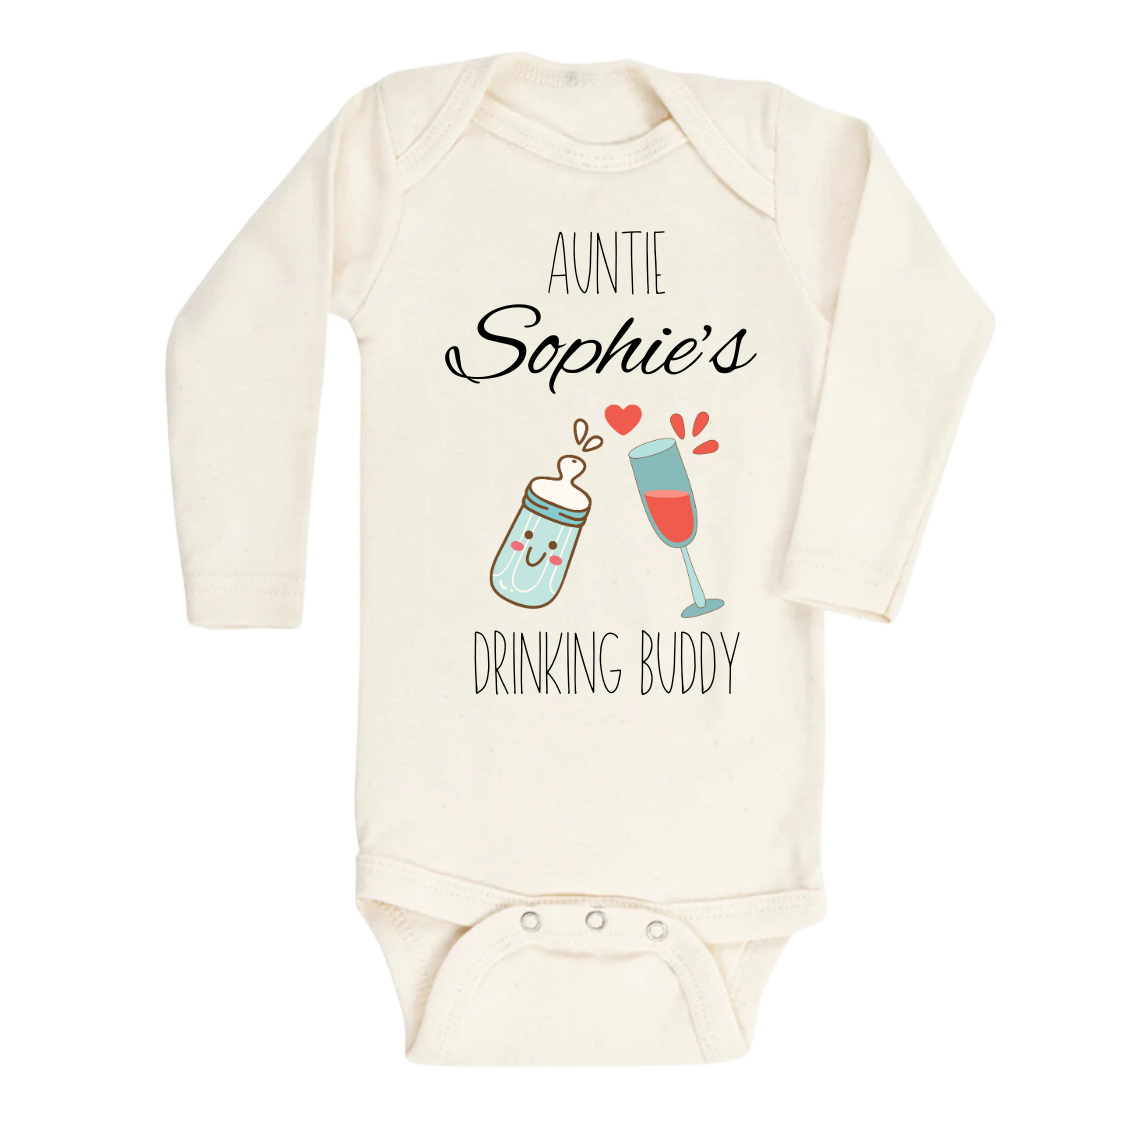 Long Sleeve Onesie Natural Baby with a cute printed design of a wine glass and a milk bottle, customizable with the text 'Aunt's Drinking Buddy'.